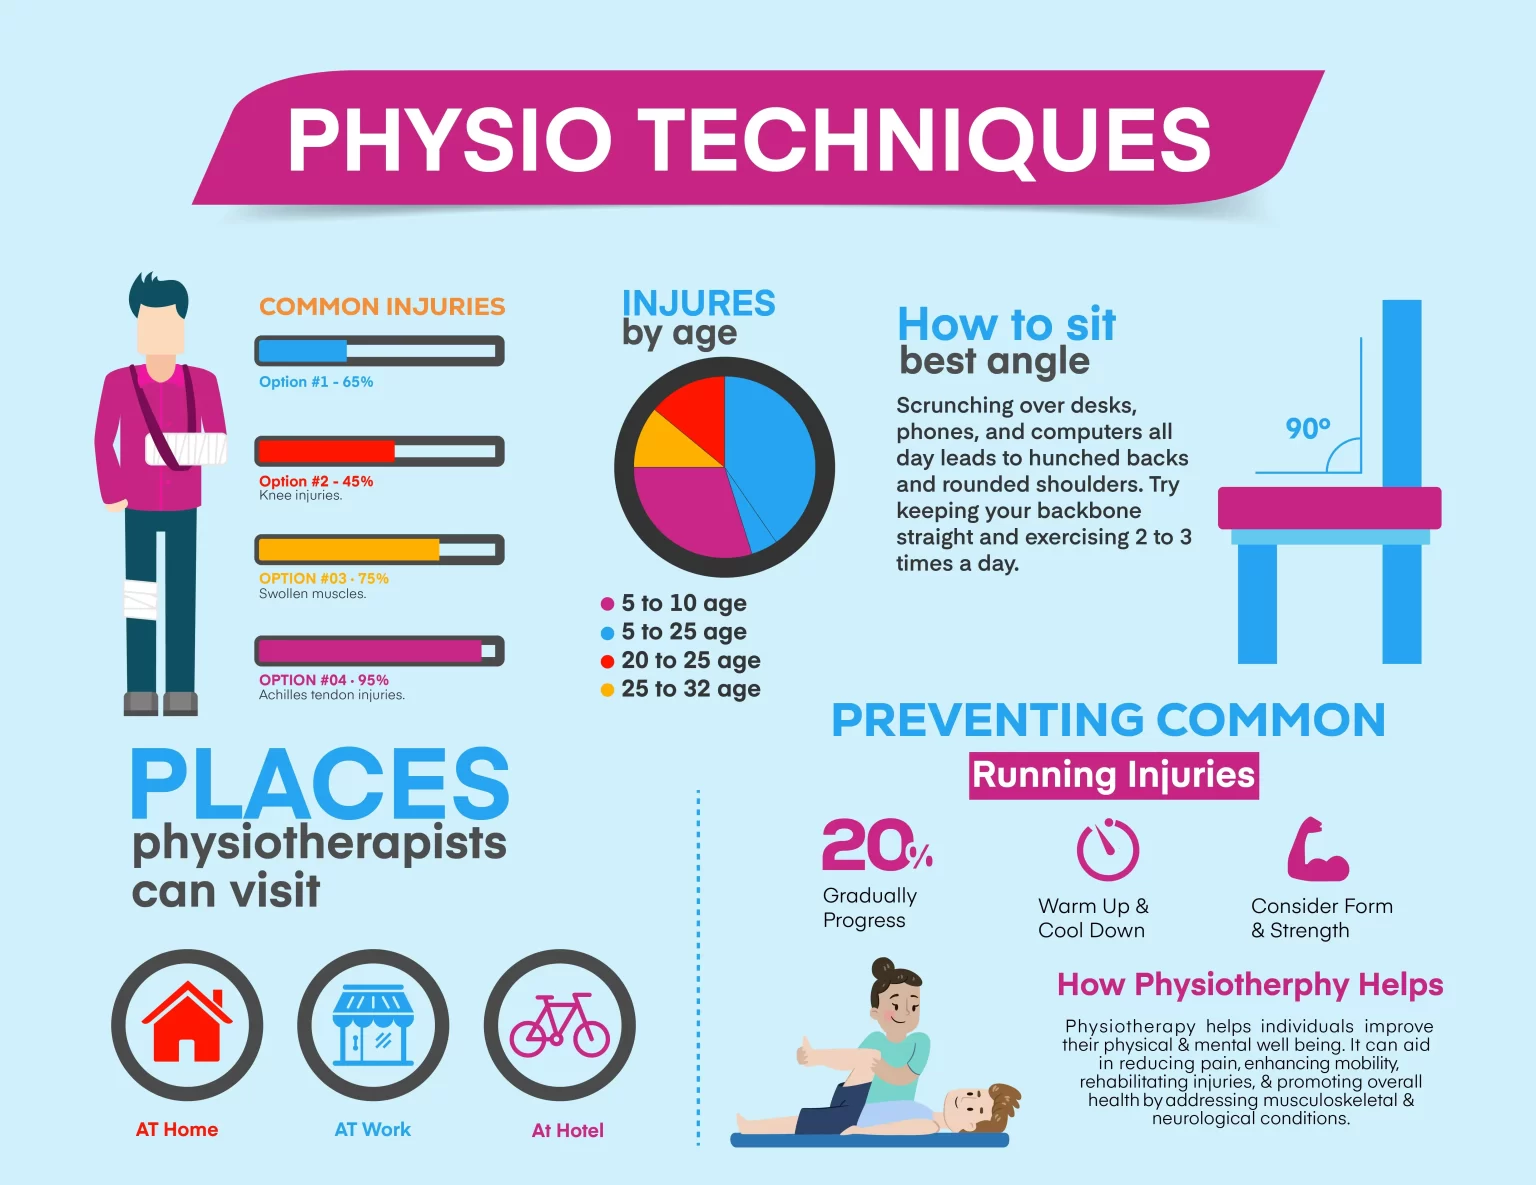 Advanced physiotherapy methods